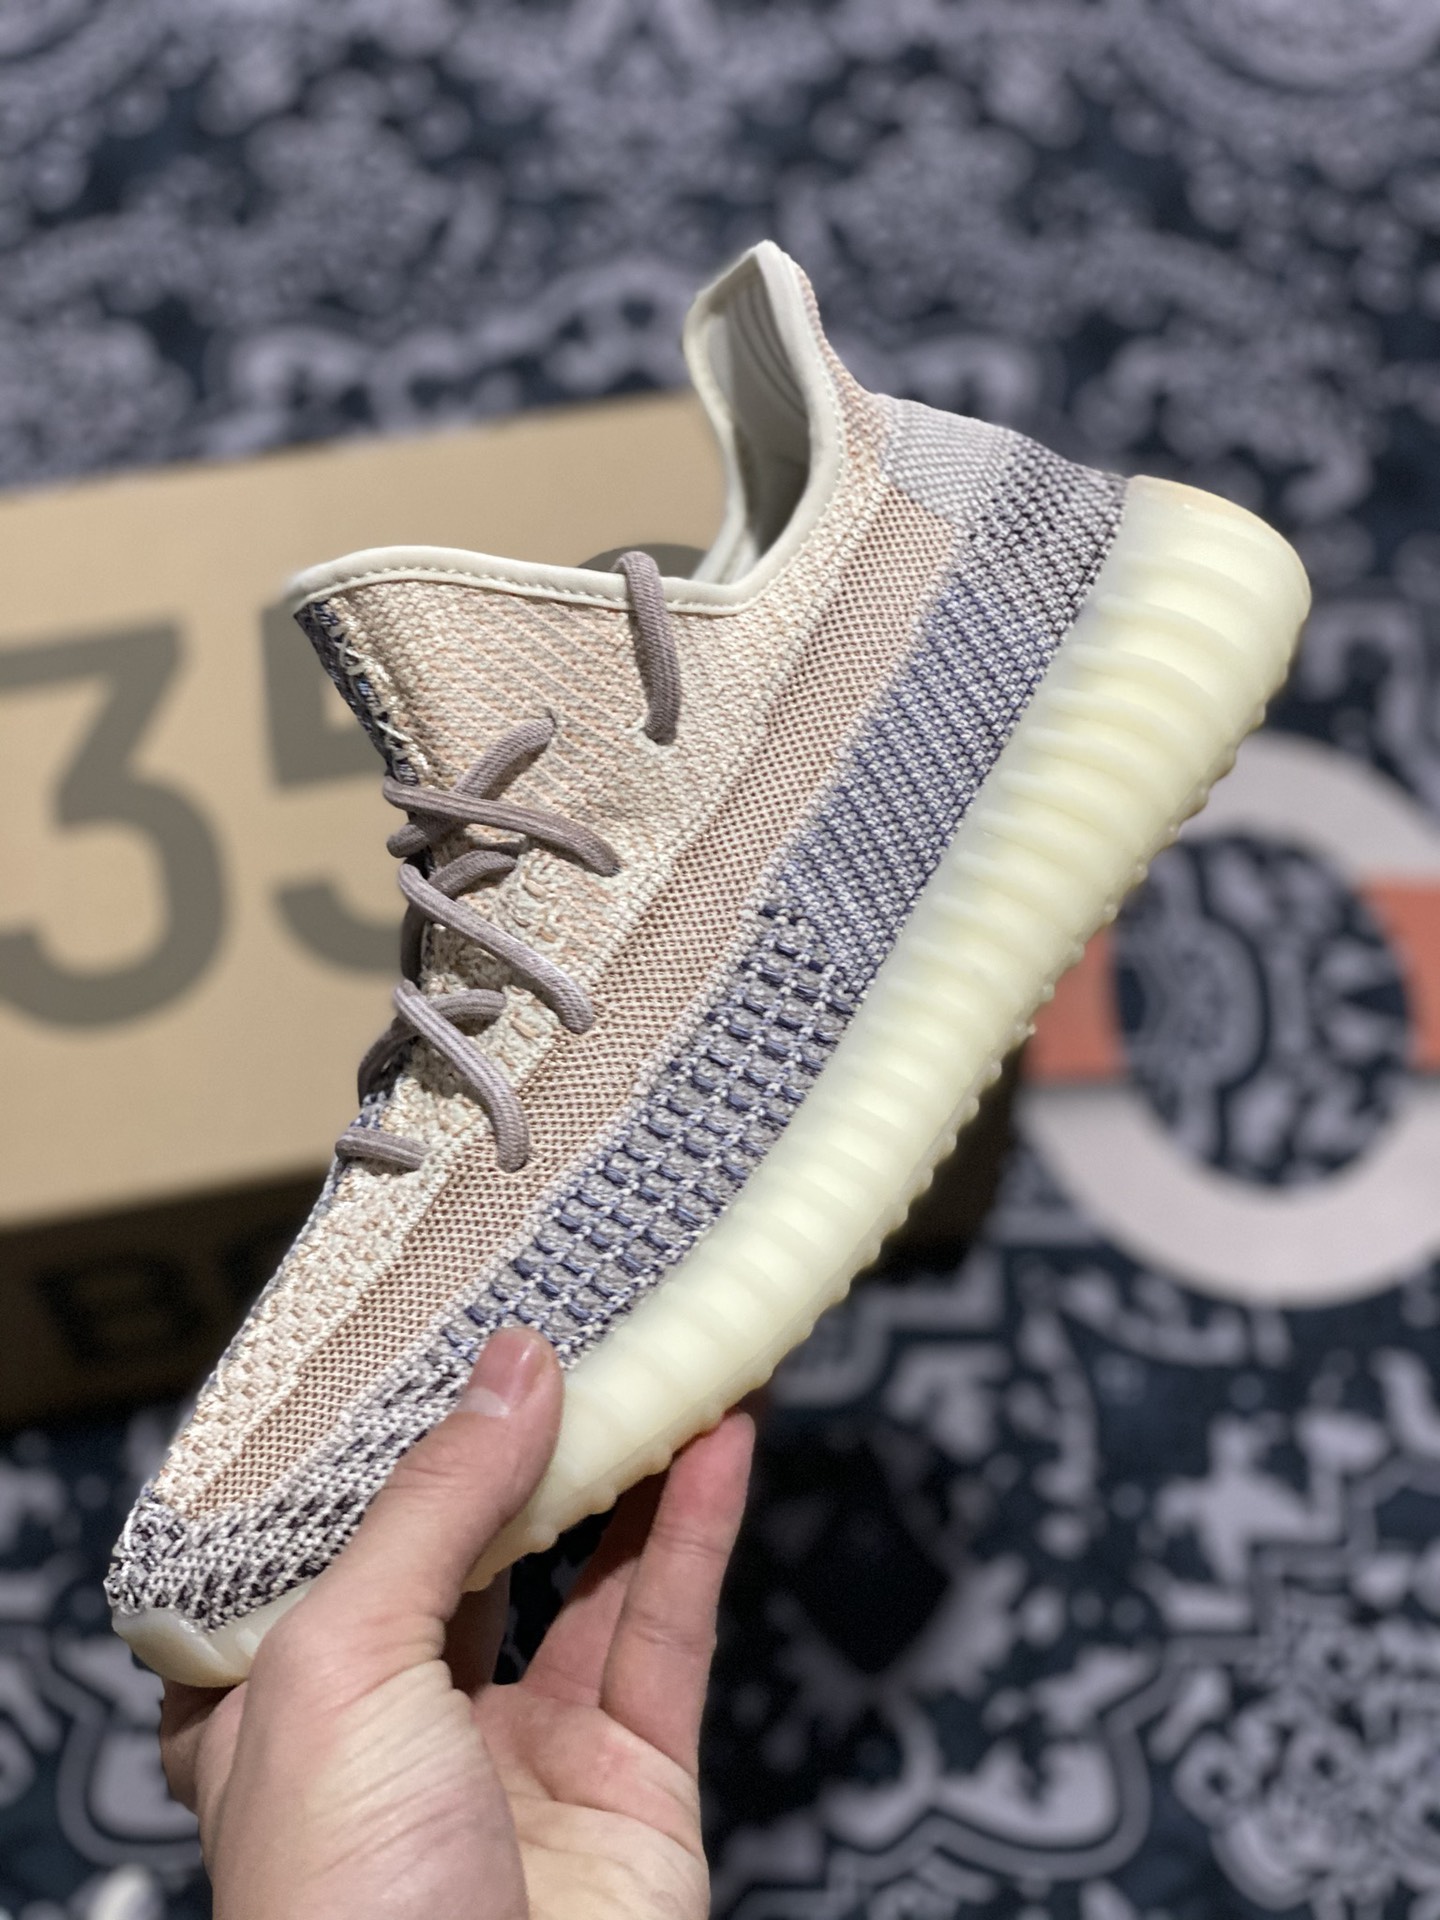 adidas Yeezy Boost 350 v2 “Ash Pearl” GY7658 For Sale – Sneaker Hello